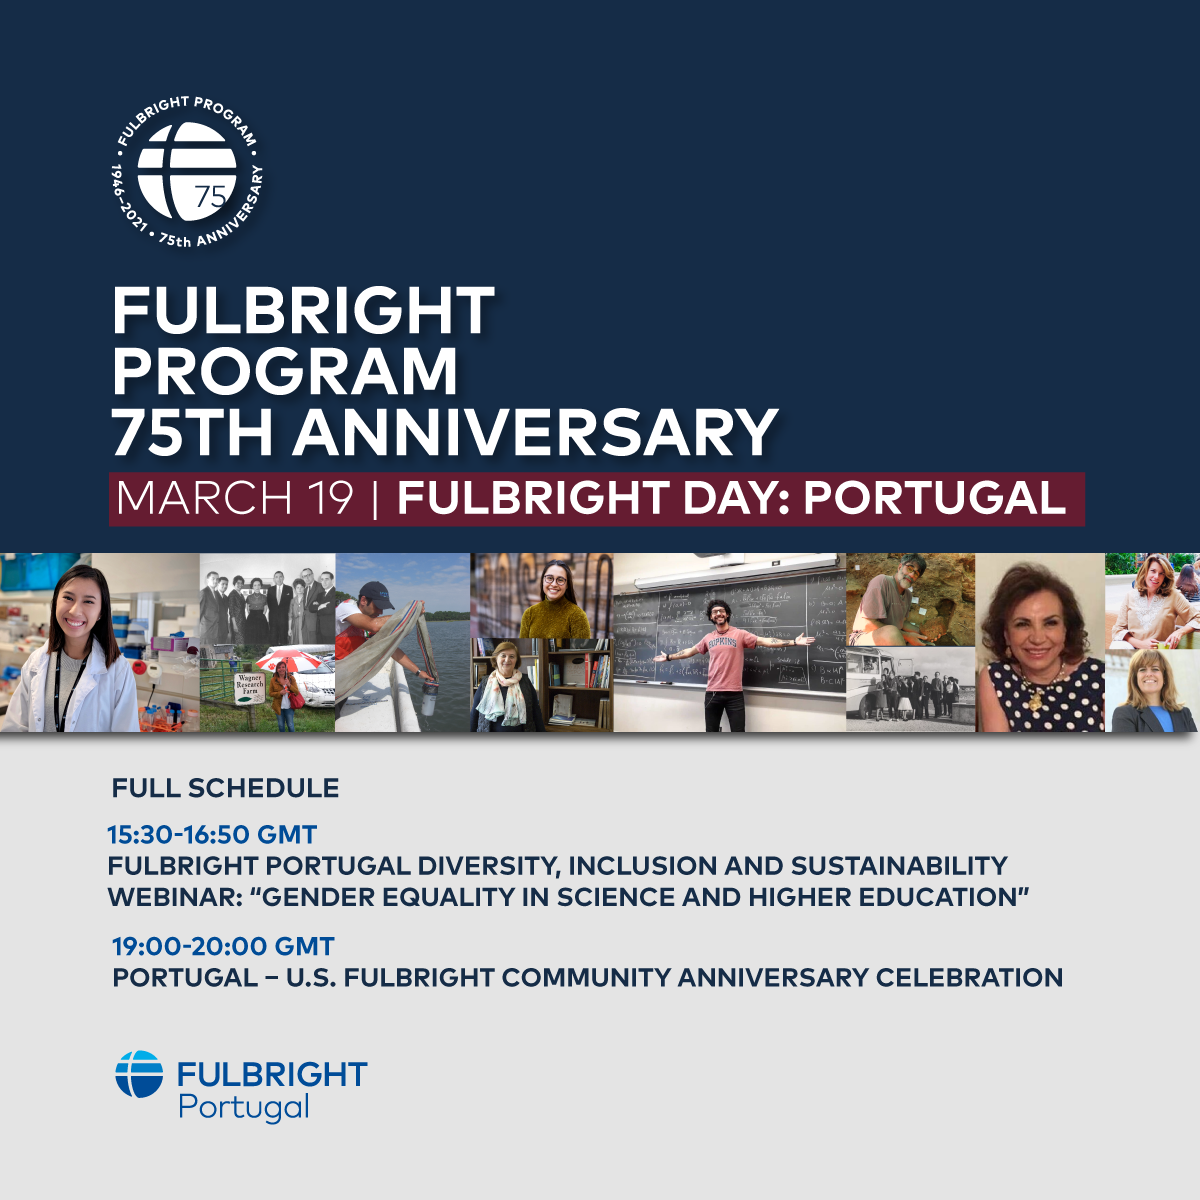 Fulbright Day: Portugal